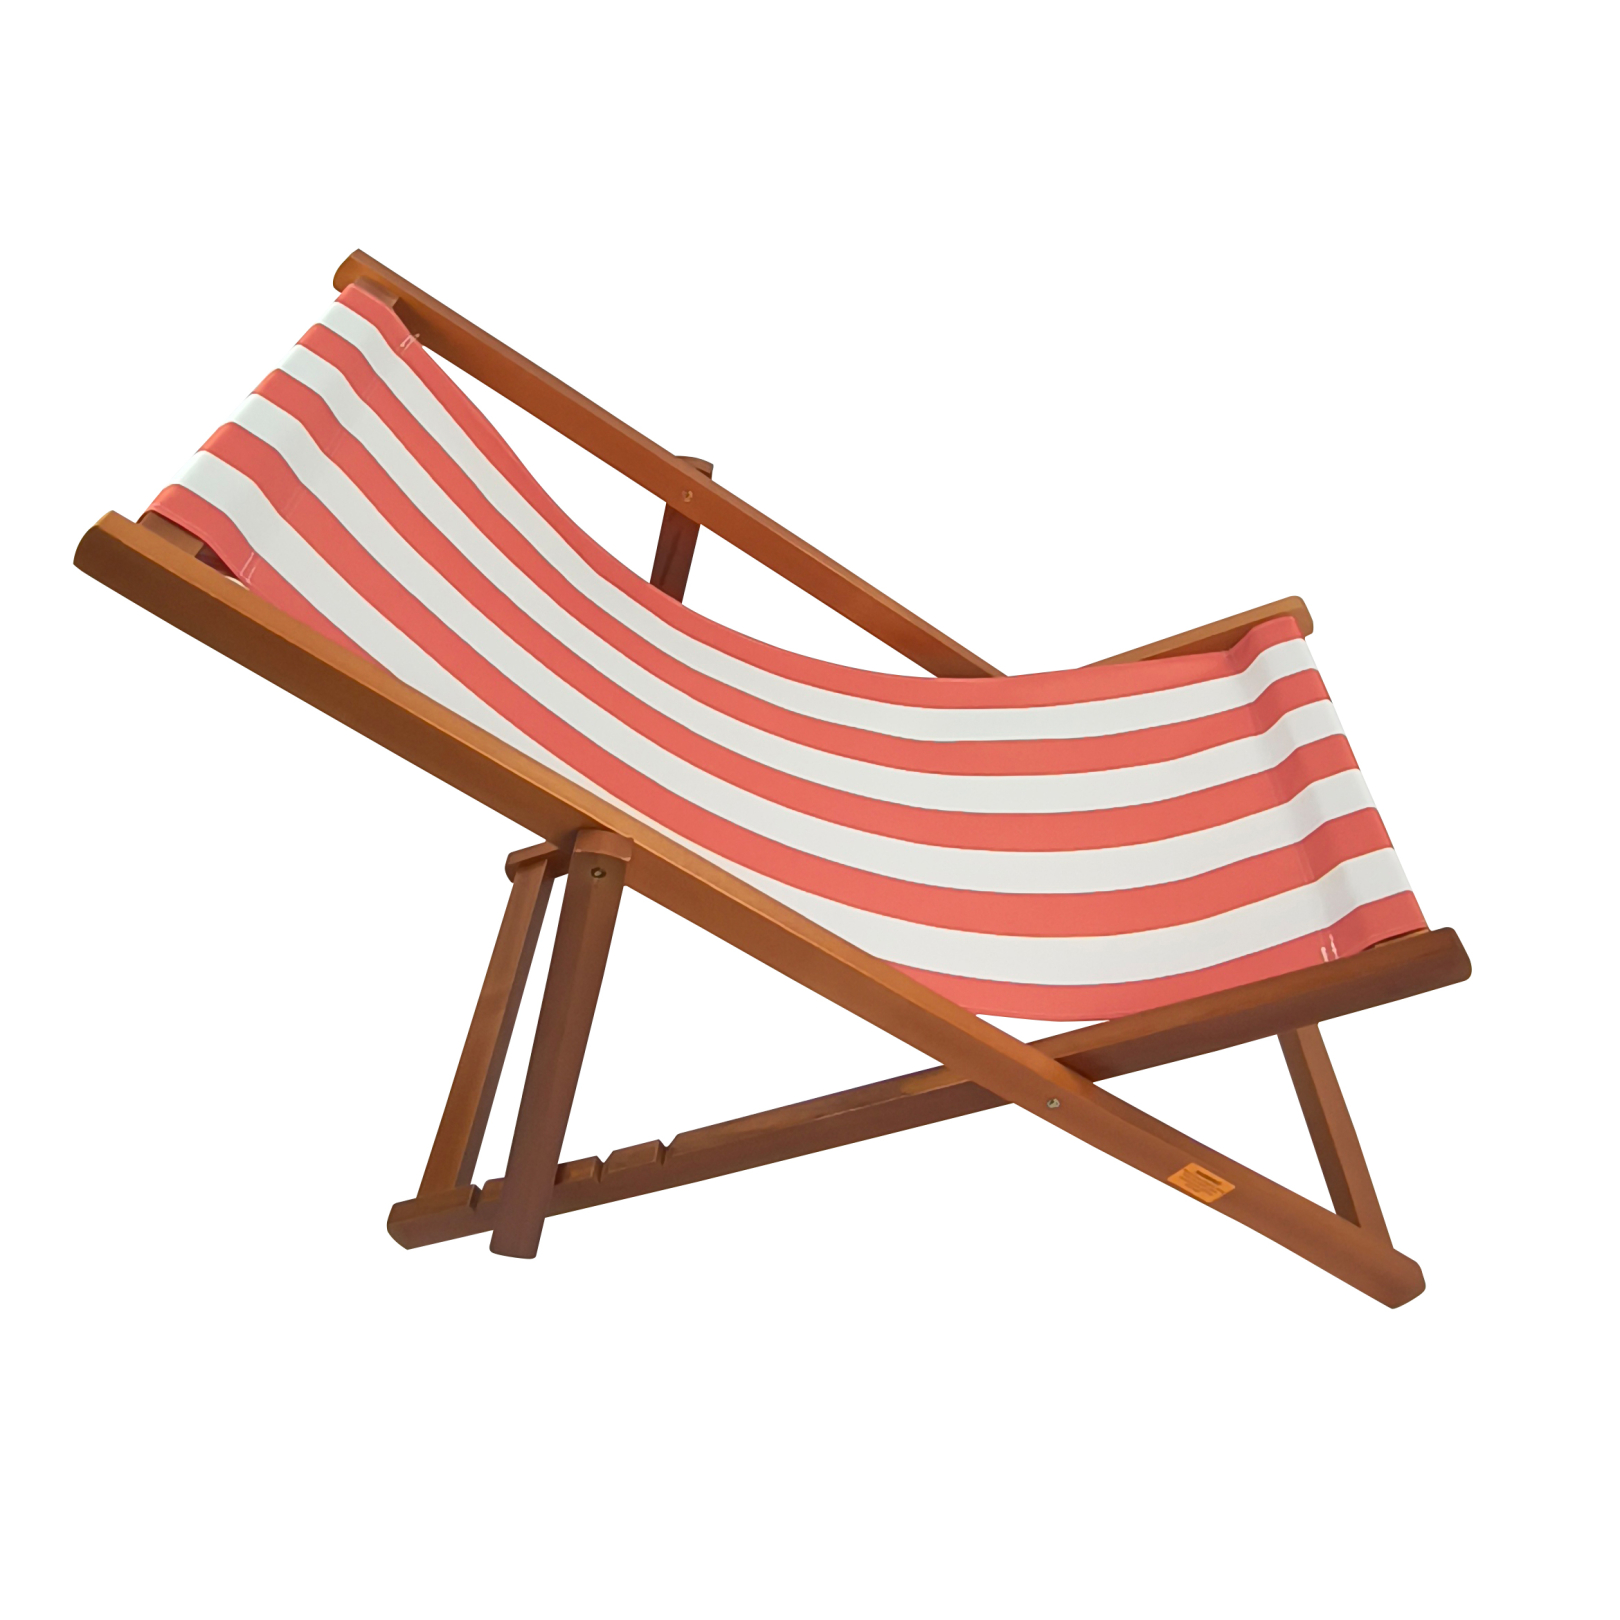 Outdoor Folding Beach Chaise Lounge Chair Camping Recliner, Sling Chair Beach Recliner, Beach Chair with Adjustable Back, Pool Chair Outdoor Chair Garden Chair, Portable Chair - image 5 of 7